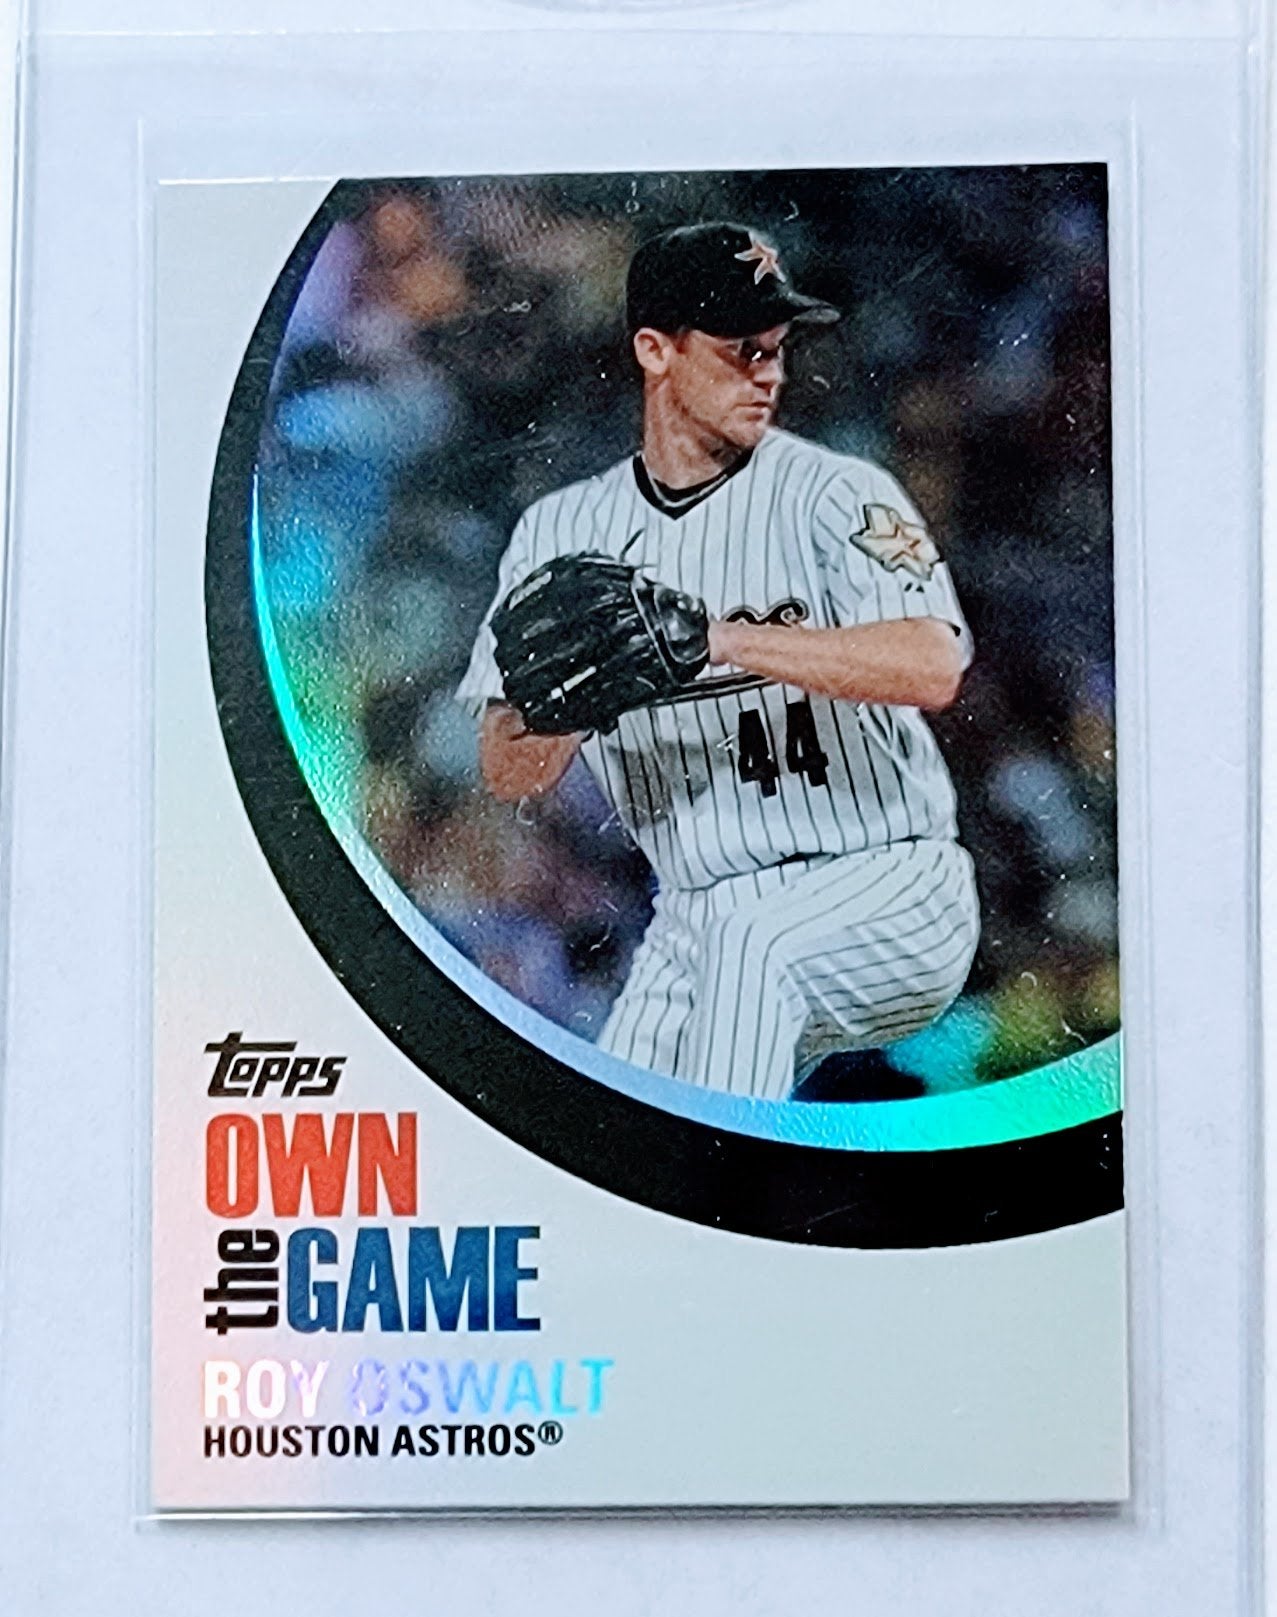 2007 Topps Roy Oswalt Own the Game Refractor Baseball Card TPTV simple Xclusive Collectibles   